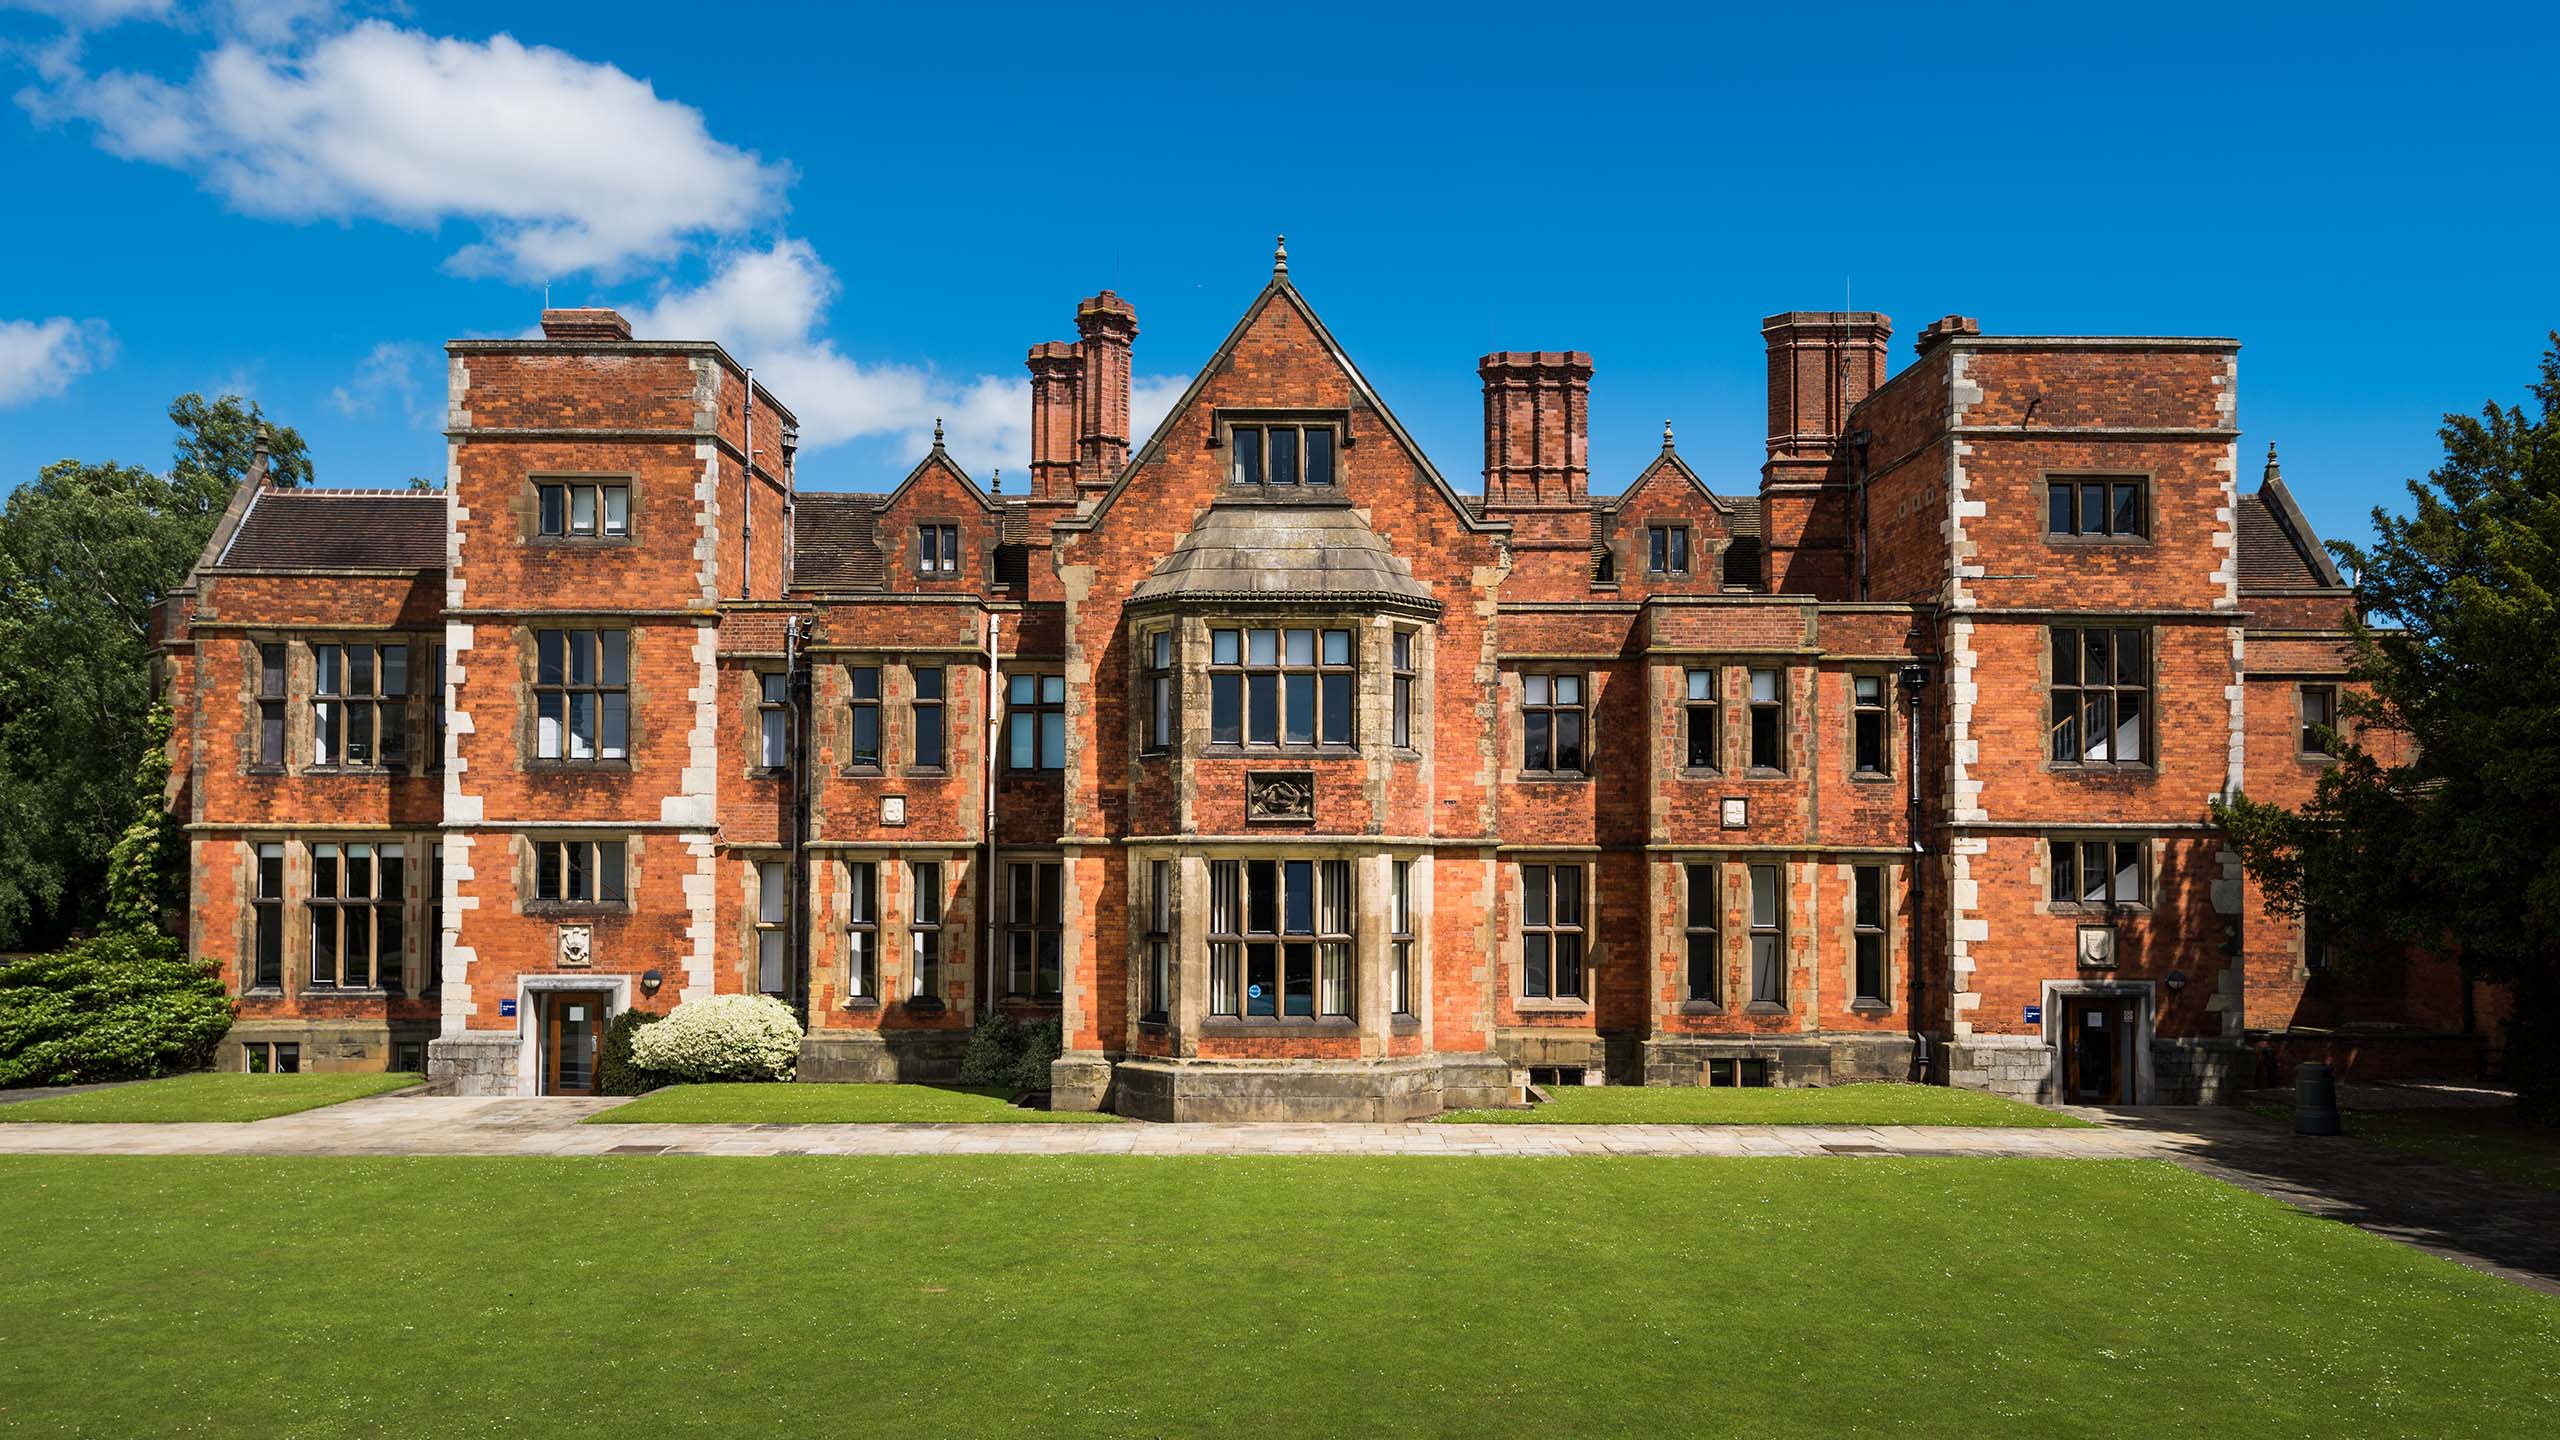 Heslington Hall, at the University of York, in summer.